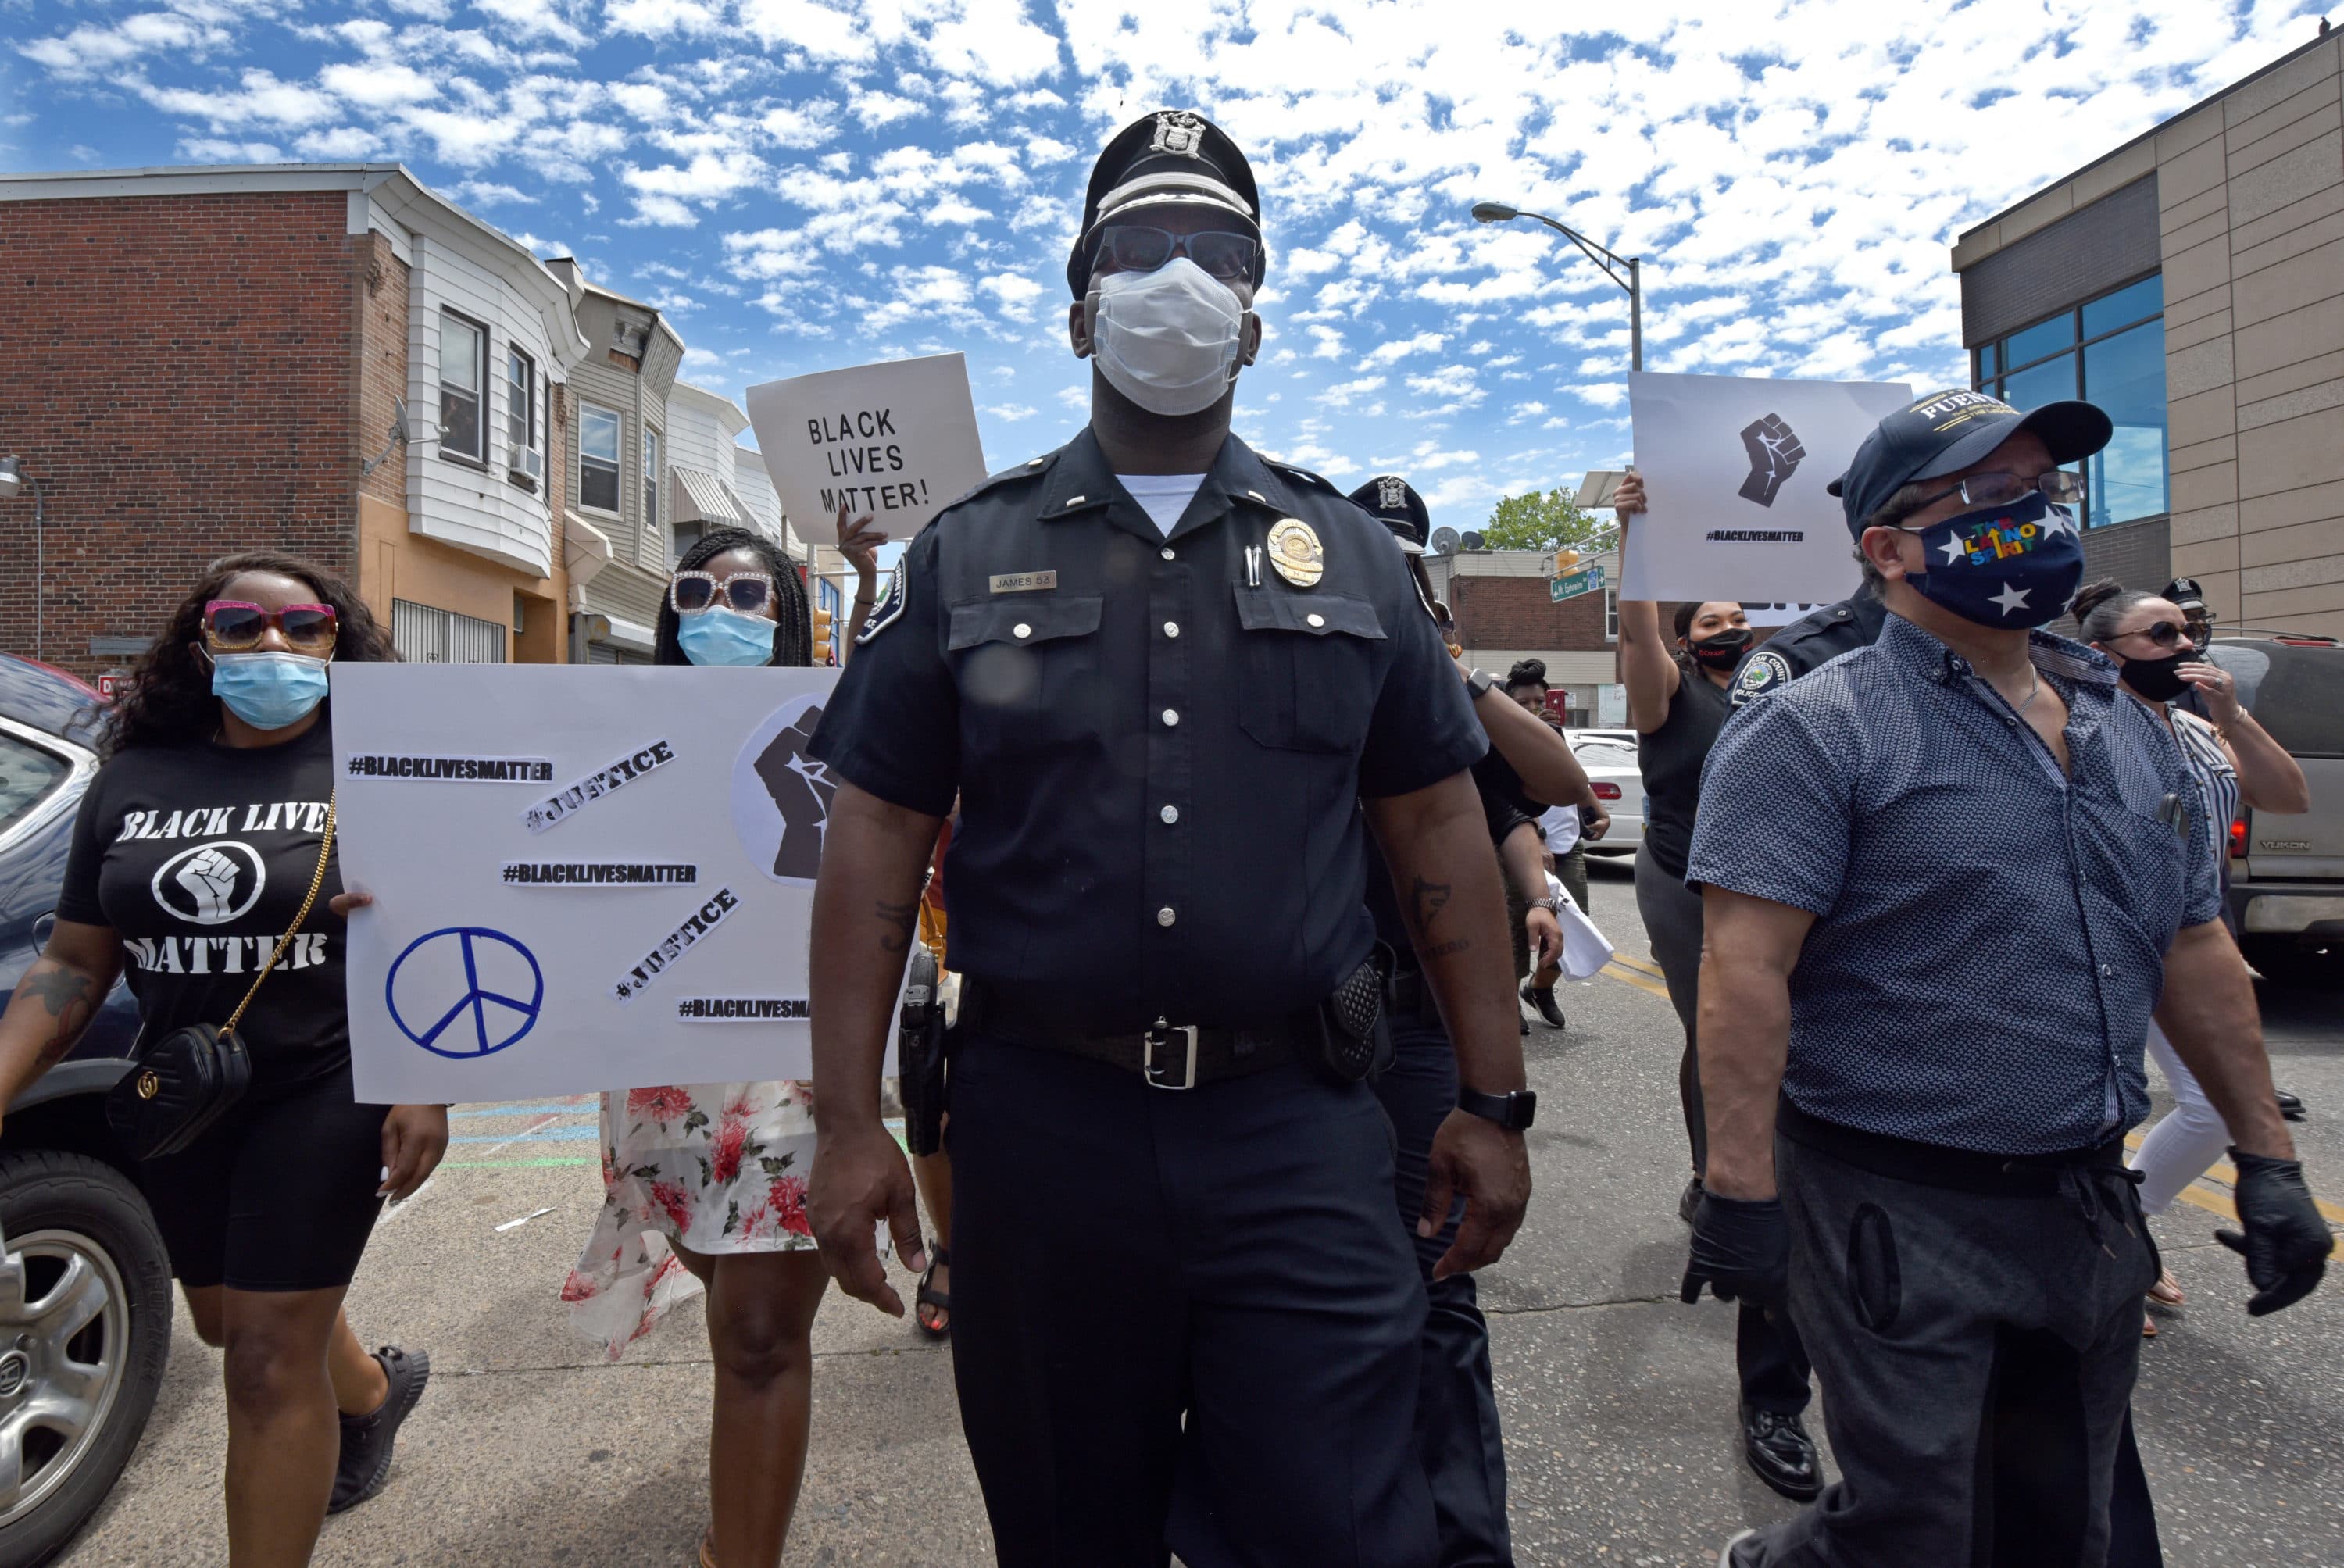 Lieutenant Zack James of the Camden County Metro Police Department marched along with demonstrators in Camden, NJ on May 30, 2020 to protest the killing of George Floyd in Minneapolis. (Photo by April Saul)